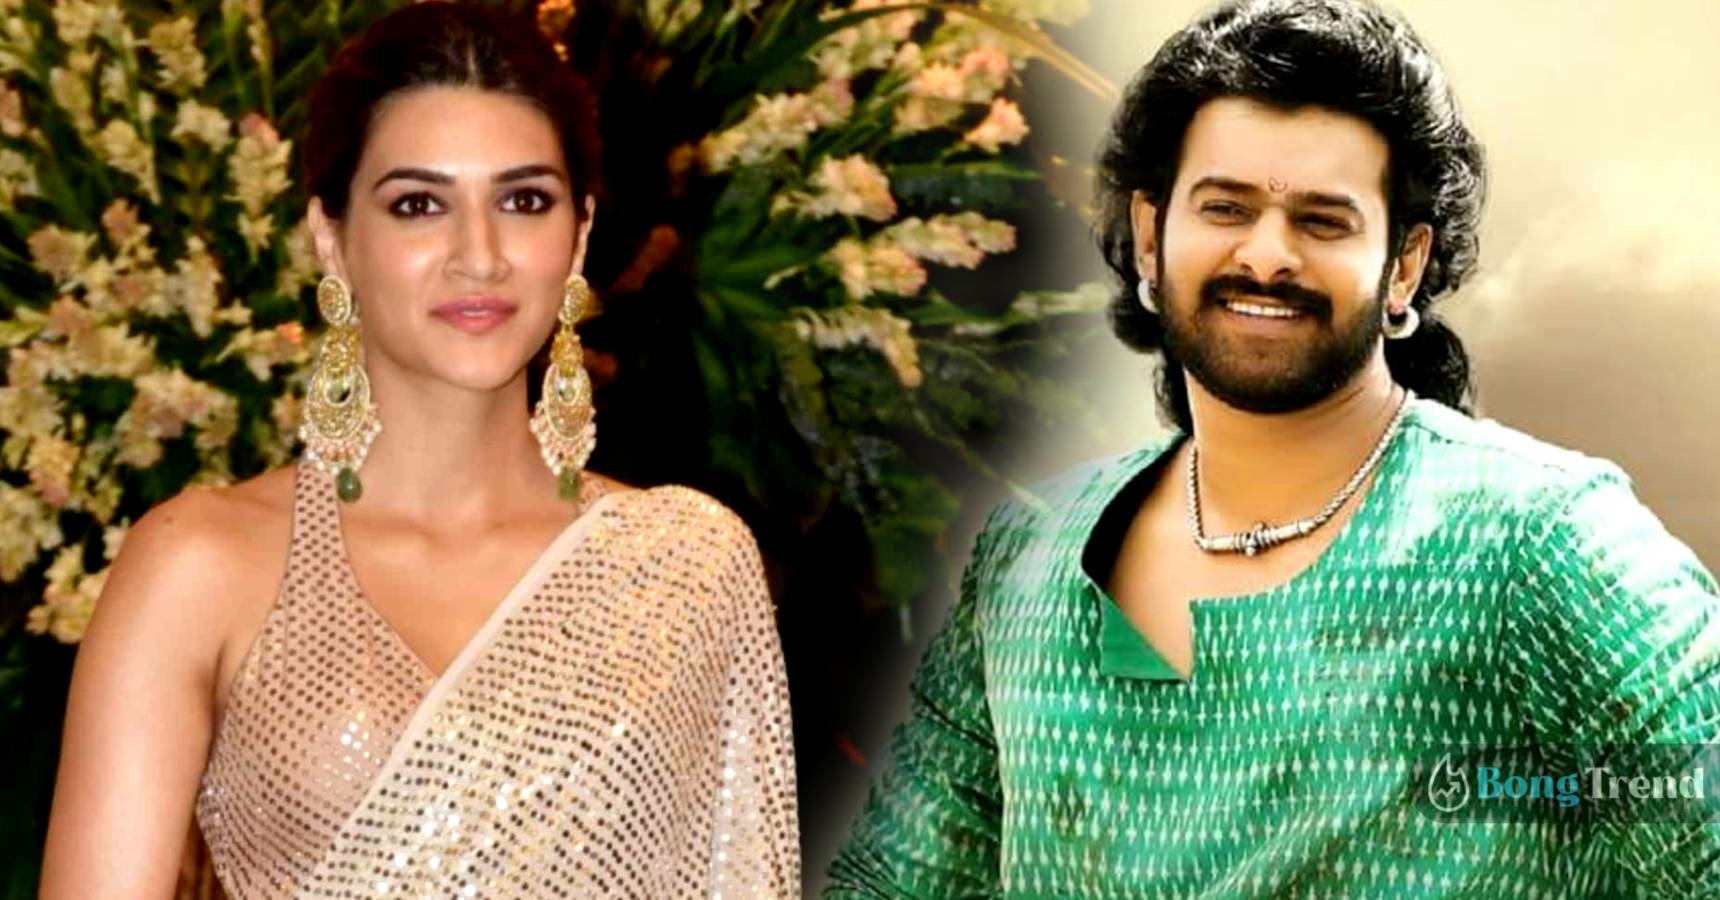 Prabhas reportedly stopped the marriage of Anushka Shetty and now he is reportedly dating Kriti Sanon